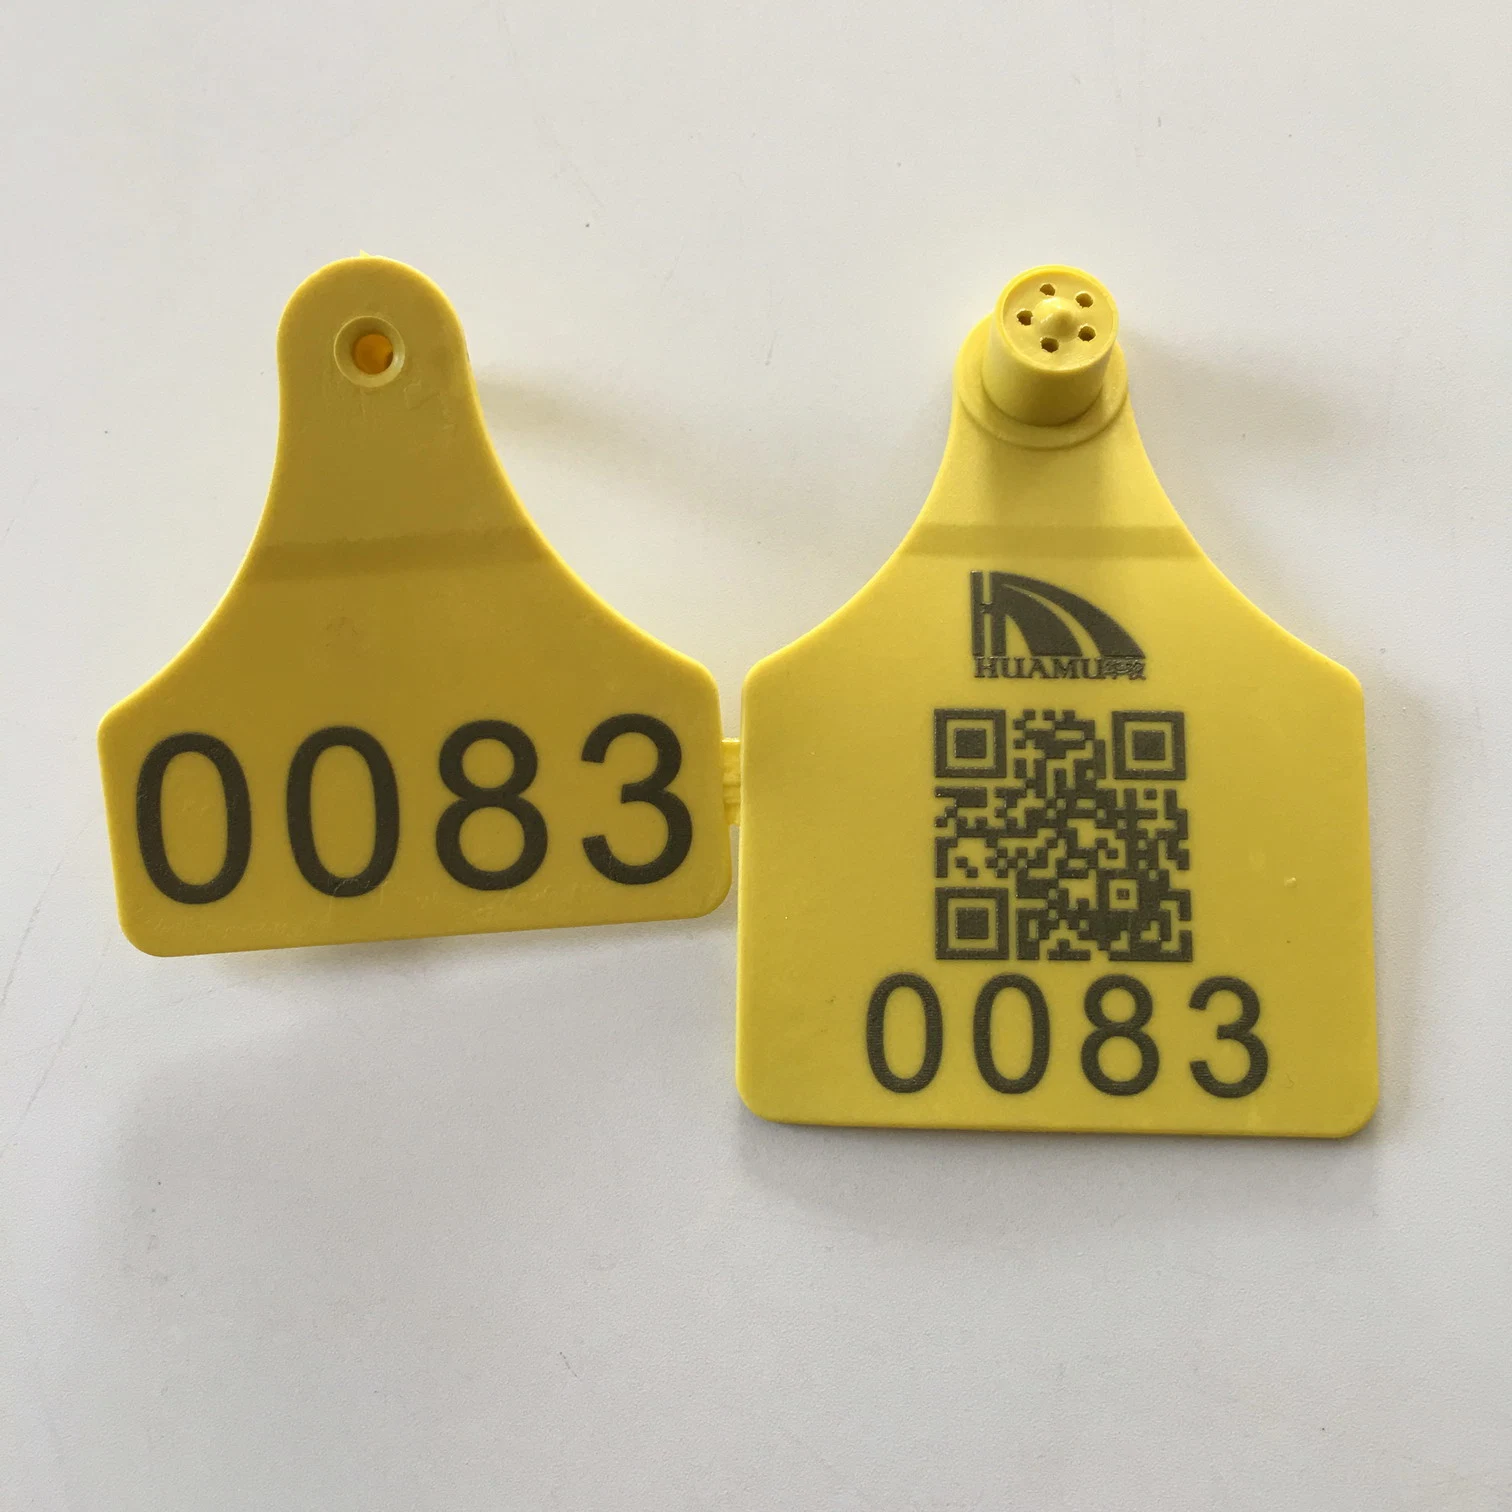 Hot Sale Icar Ear Tags for Piglets Sheep Goats